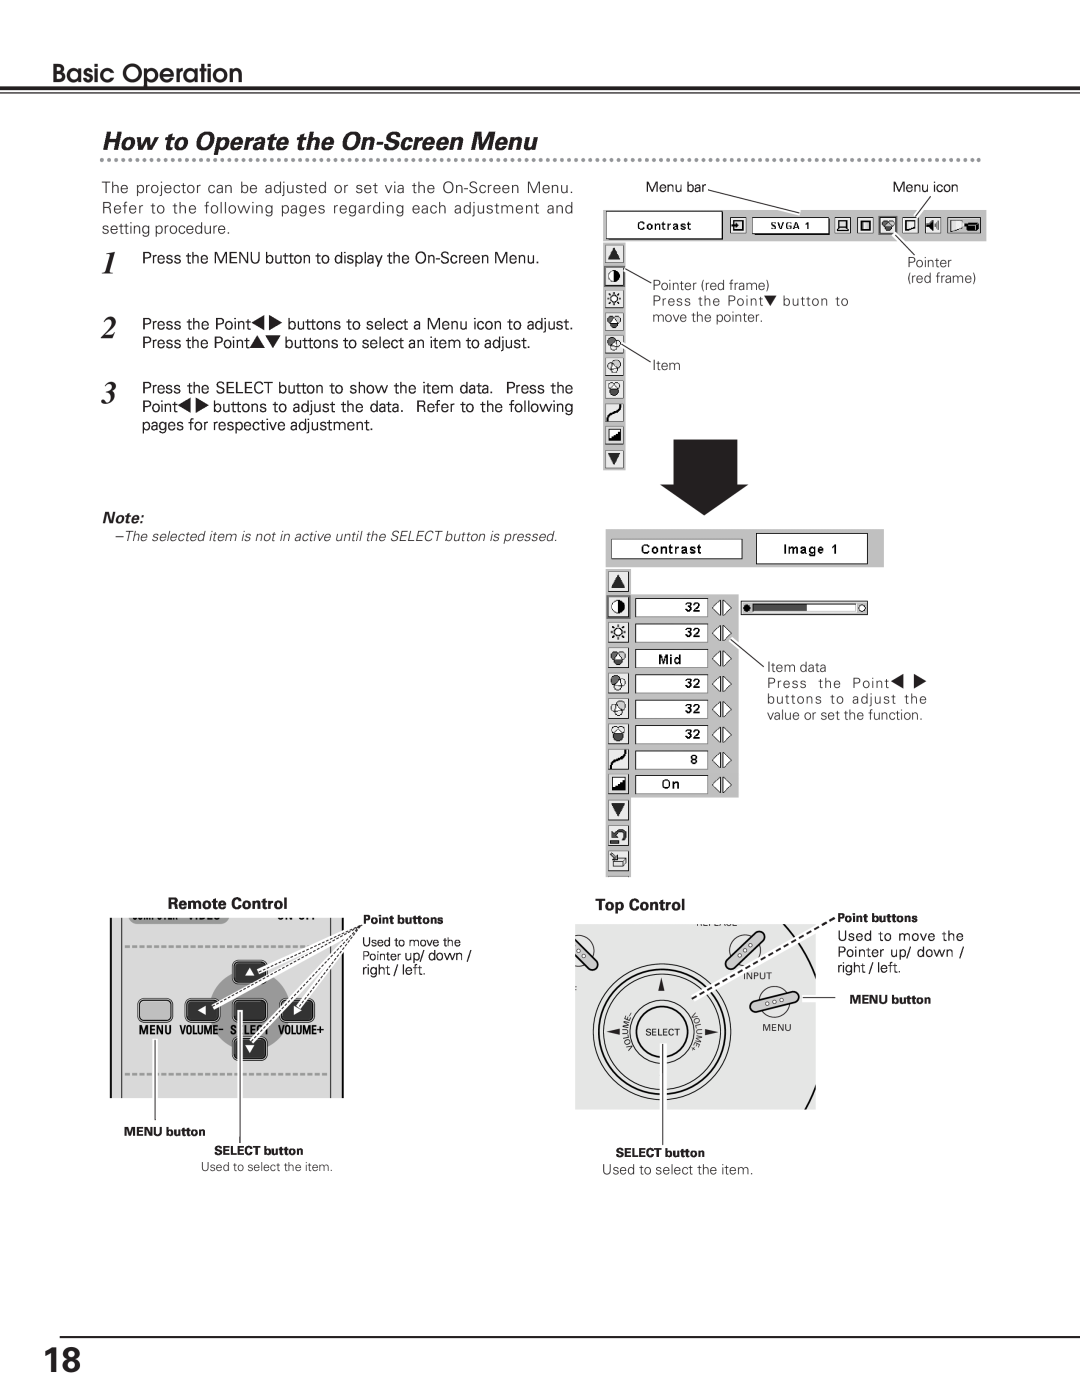 Eiki LC-SD12 owner manual Basic Operation, How to Operate the On-Screen Menu 